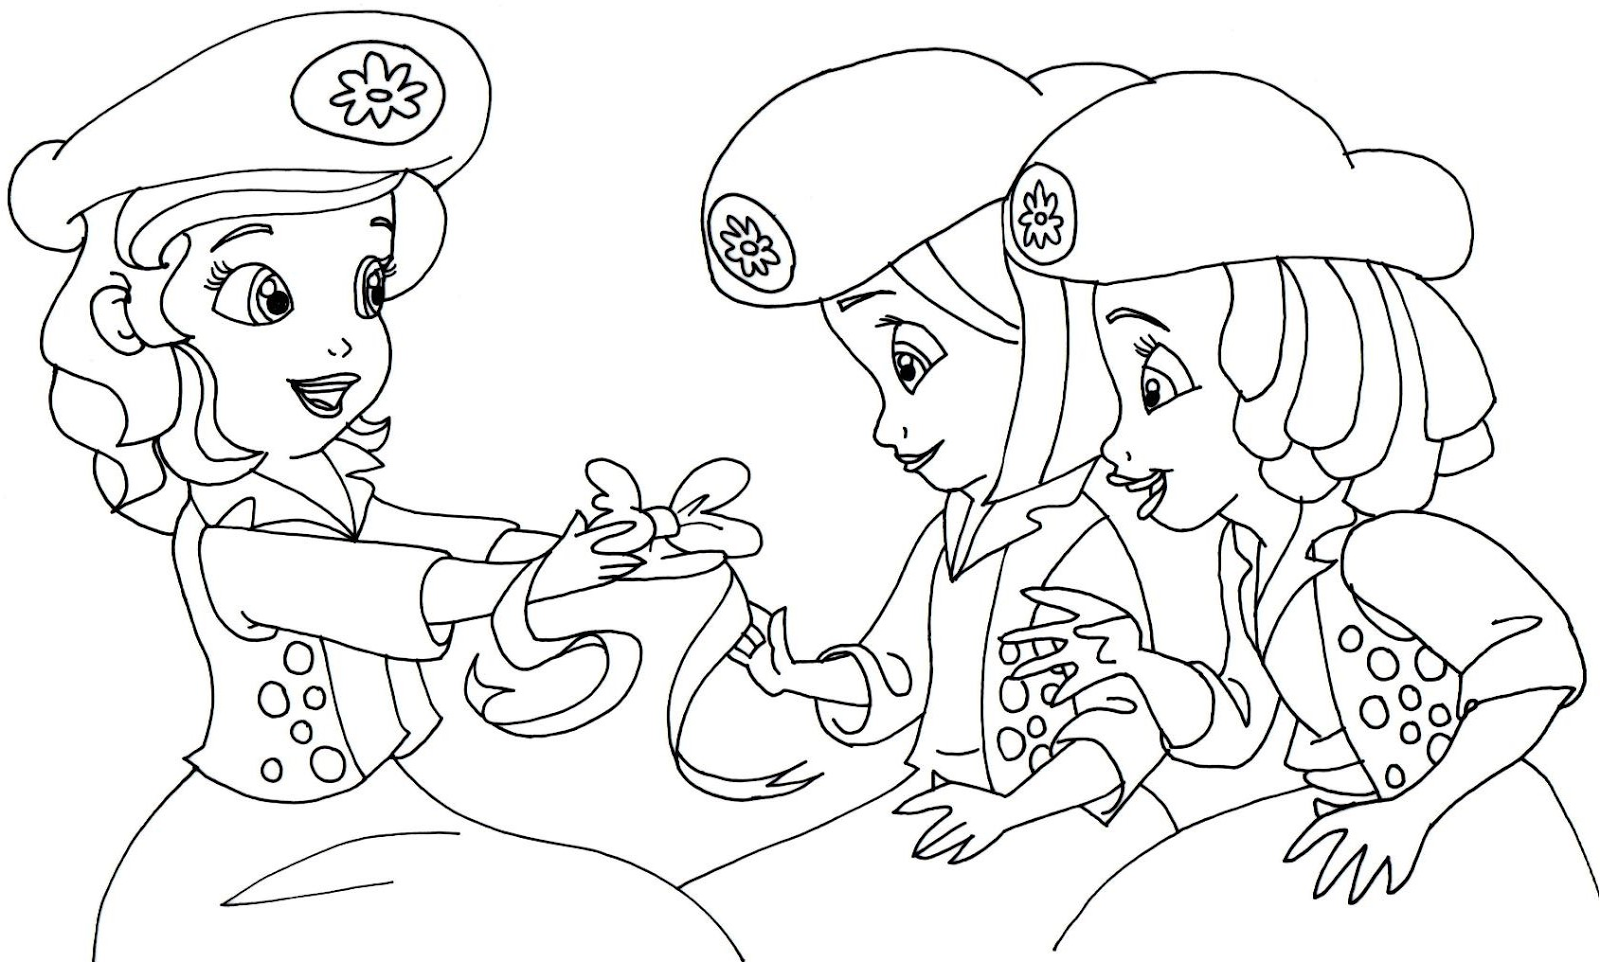 Clover Sophia Coloring Pages To Print - Coloring Pages For All Ages